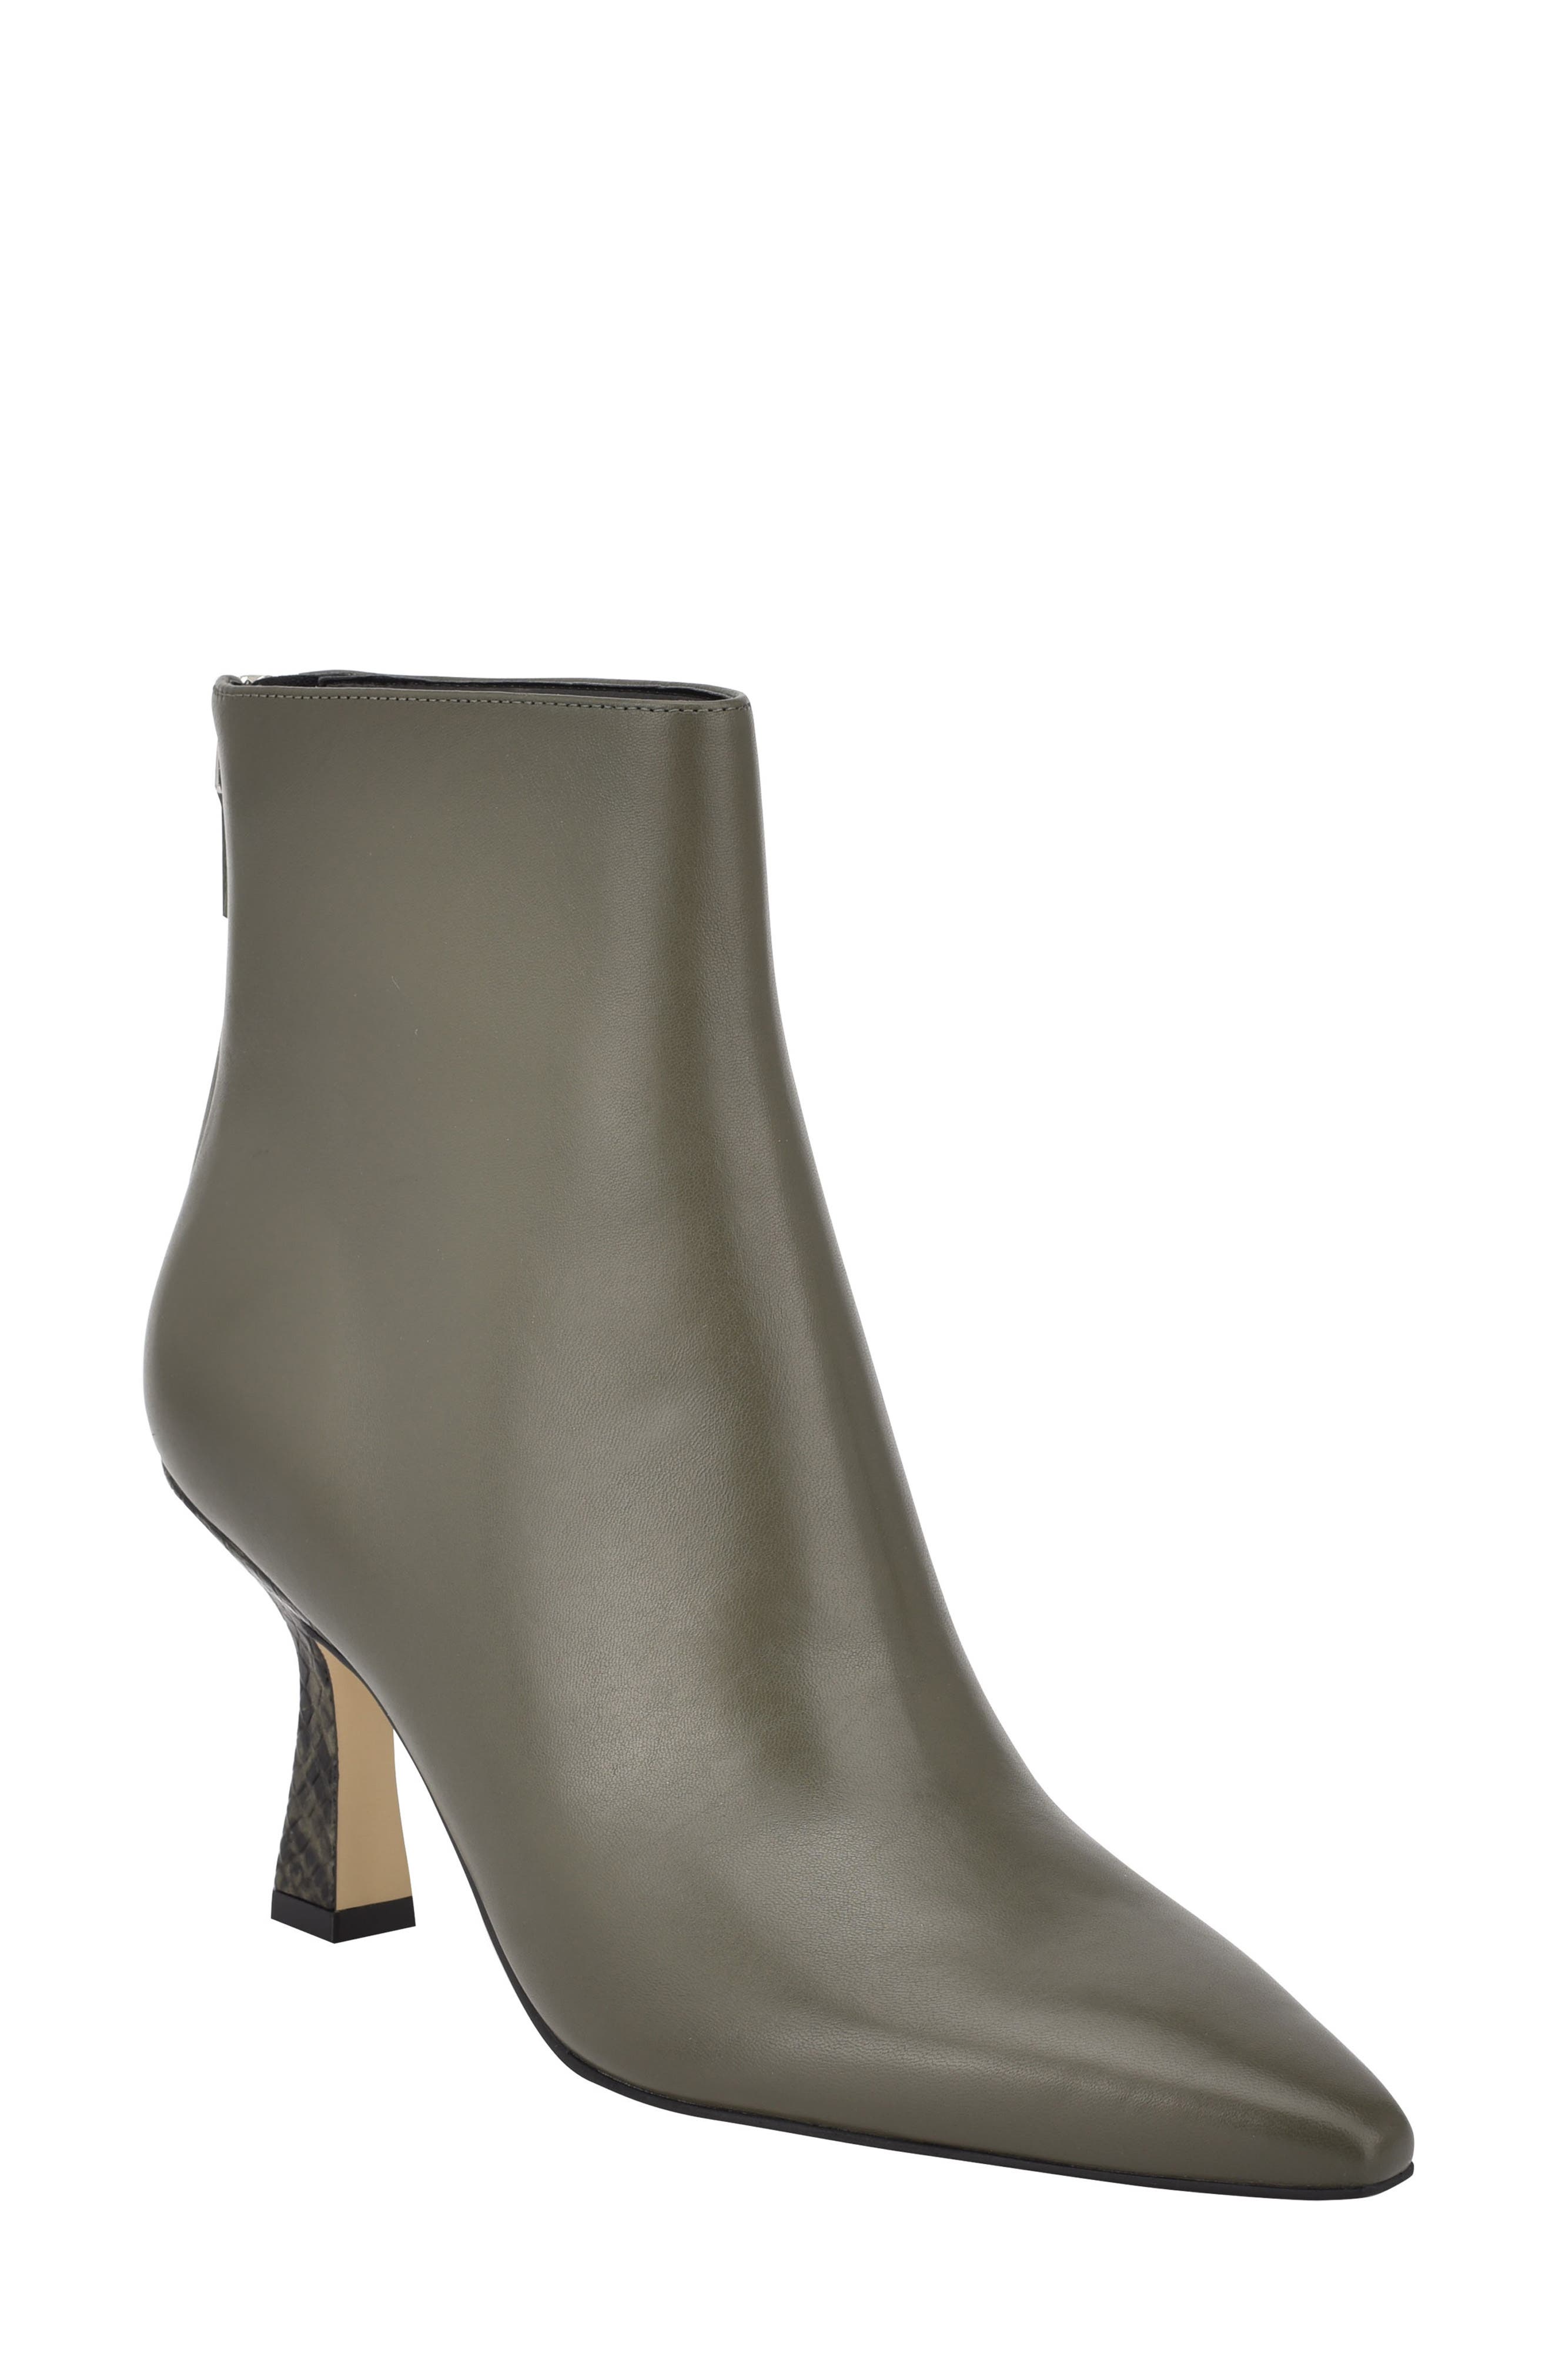 Marc Fisher Ltd Hint Bootie In Olive Leather